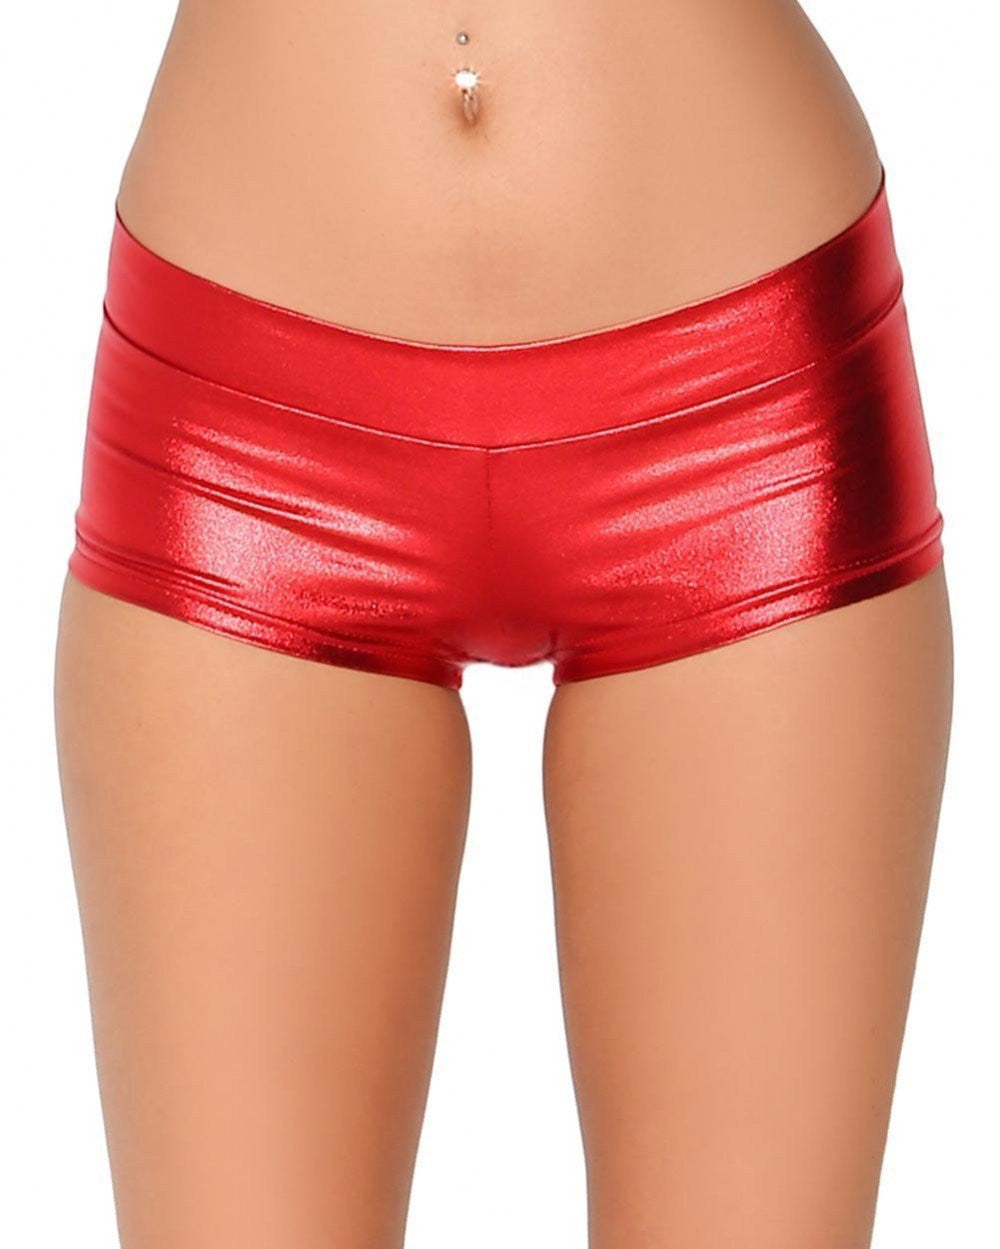 Womens Low Waisted Lycra Metallic Rave Booty Dance Shorts Spandex Shiny Pole Dance Shorts Gold Silver Shorts For Stage